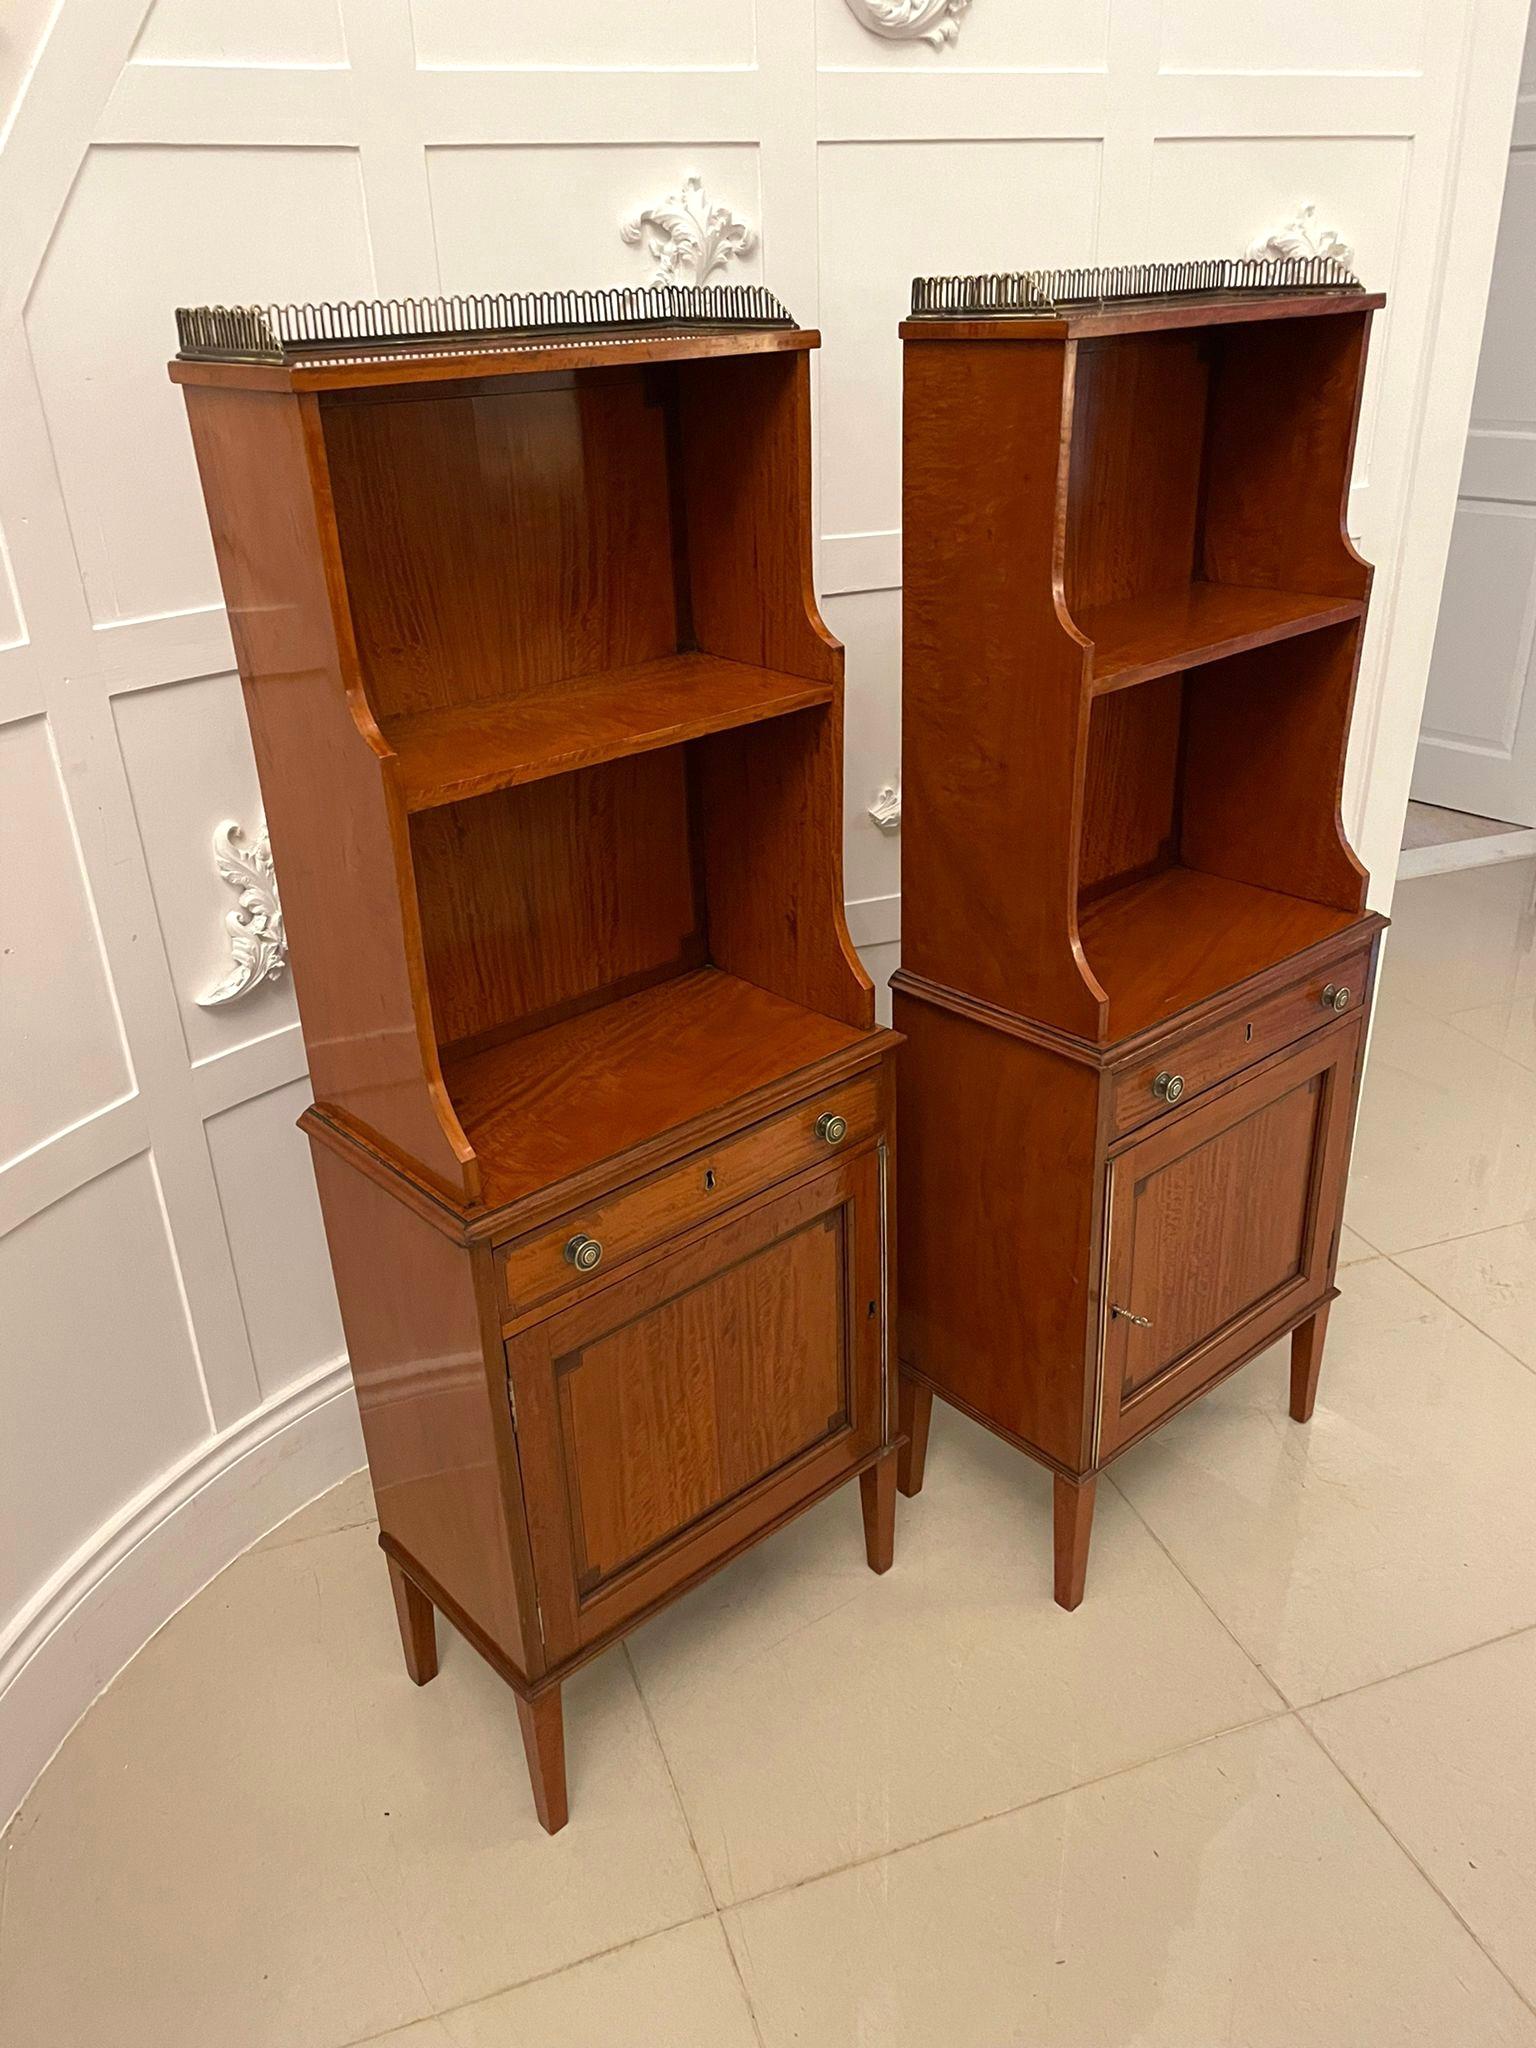 Rare Pair of Gillows Antique Quality Satinwood Waterfall Bookcases In Good Condition For Sale In Suffolk, GB